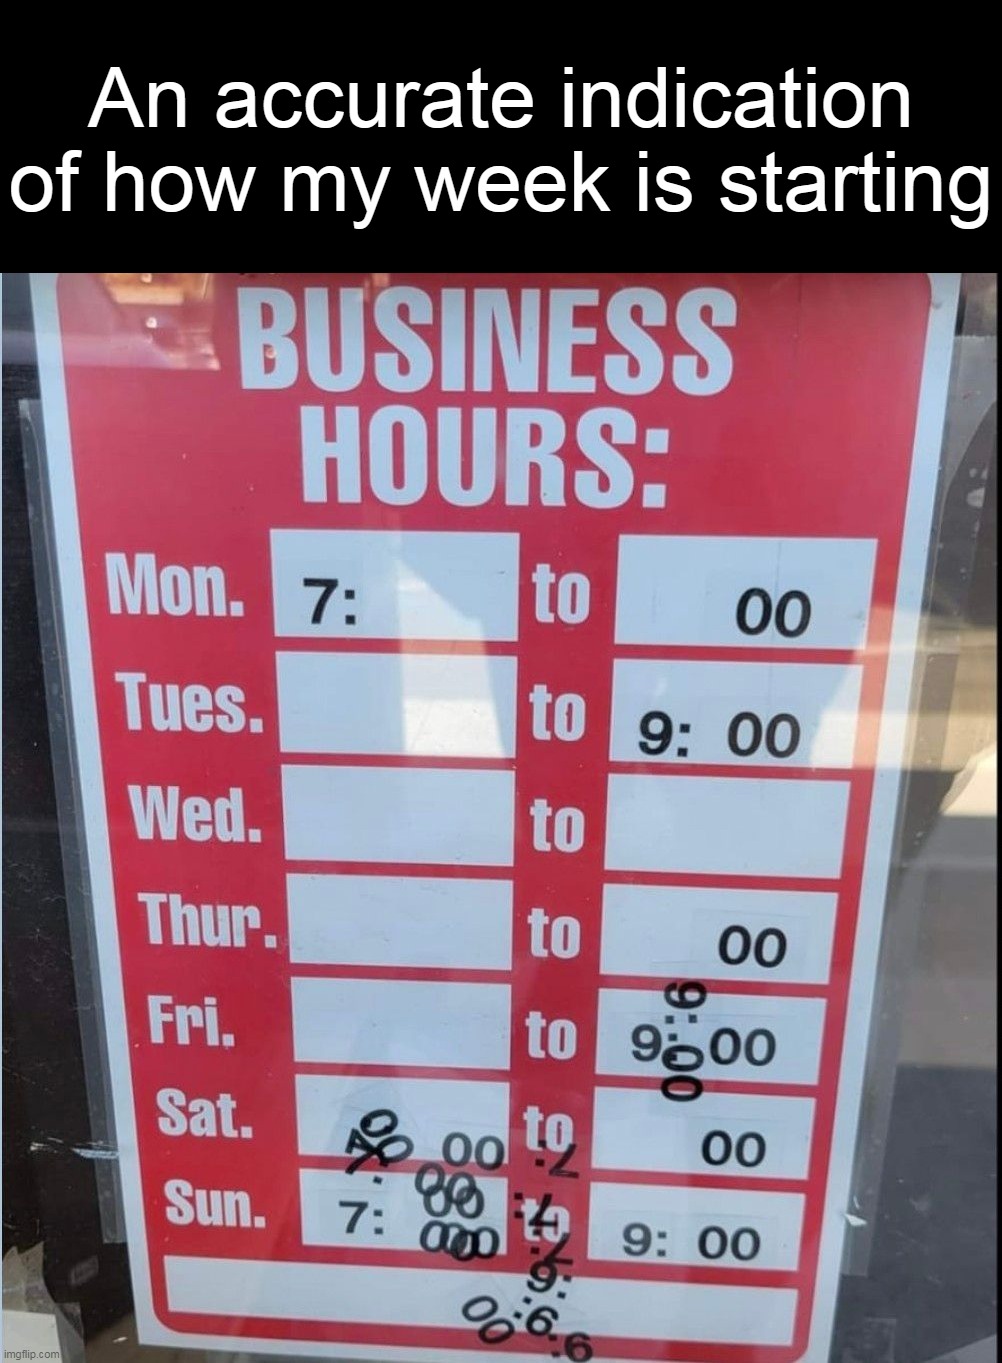 An accurate indication of how my week is starting | image tagged in meme,memes,humor,relatable | made w/ Imgflip meme maker